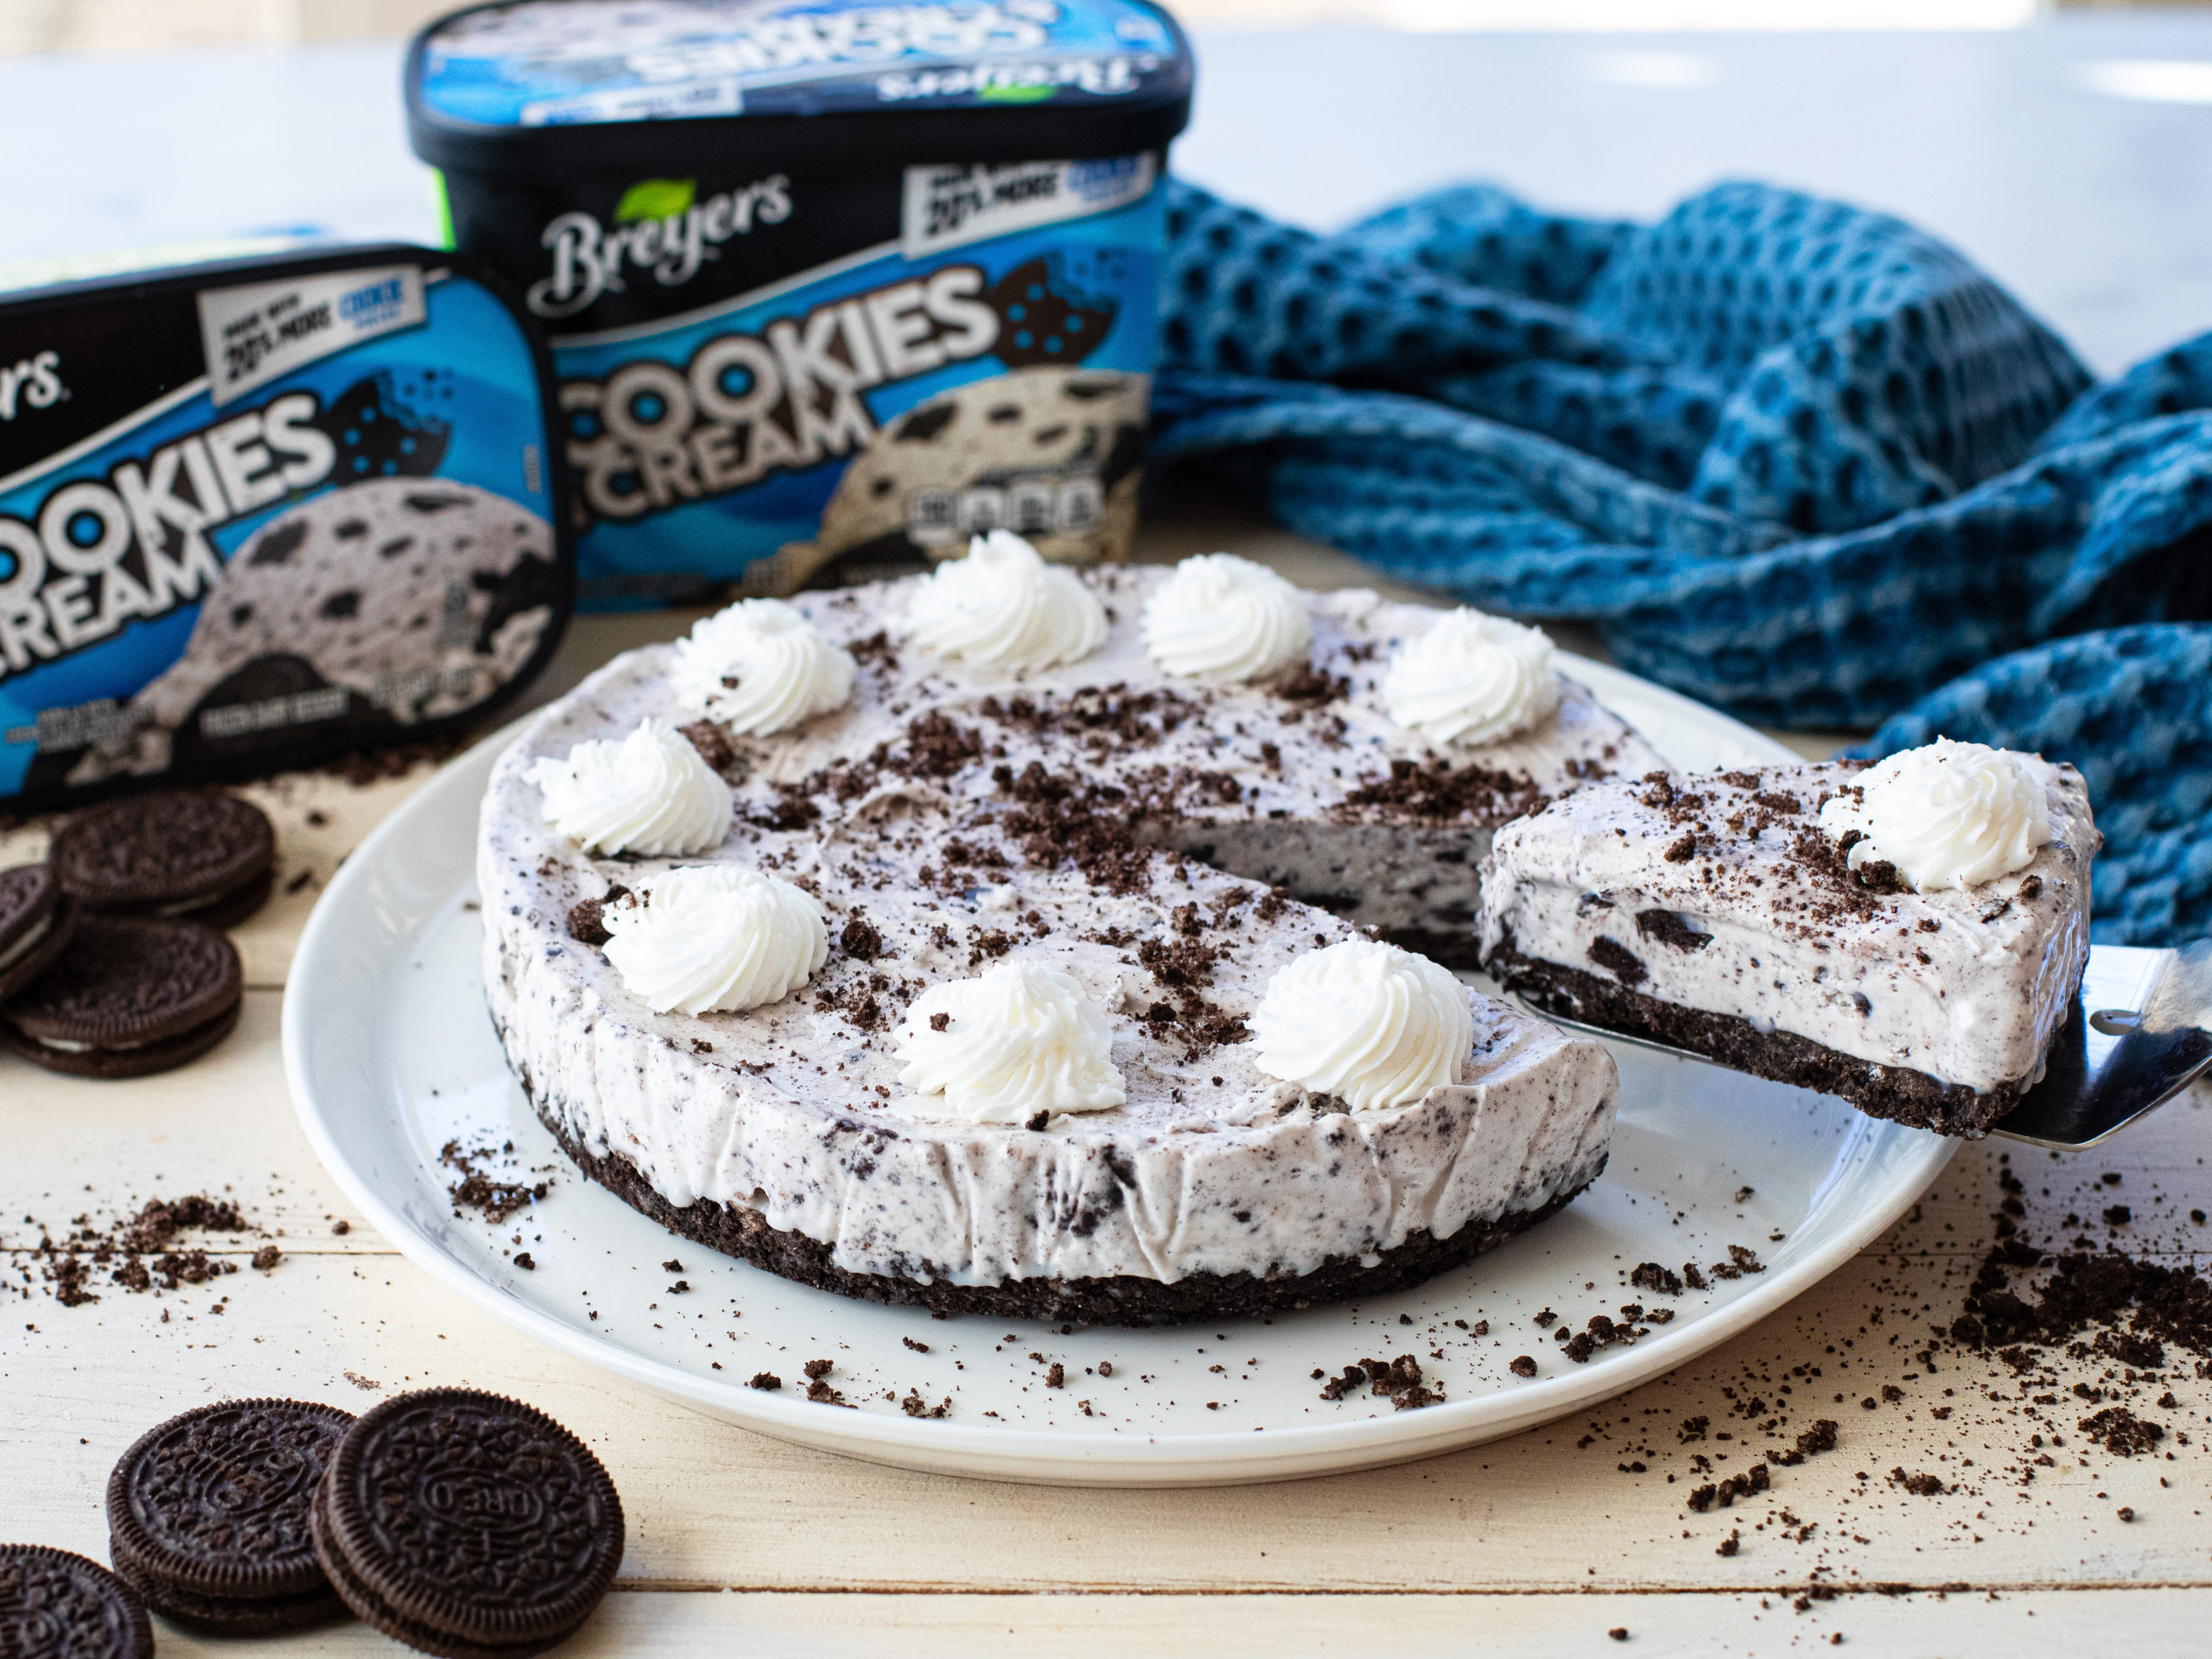 Cookies & Cream Ice Cream Pie For Mom - Made Perfect With Breyer's on I Heart Publix